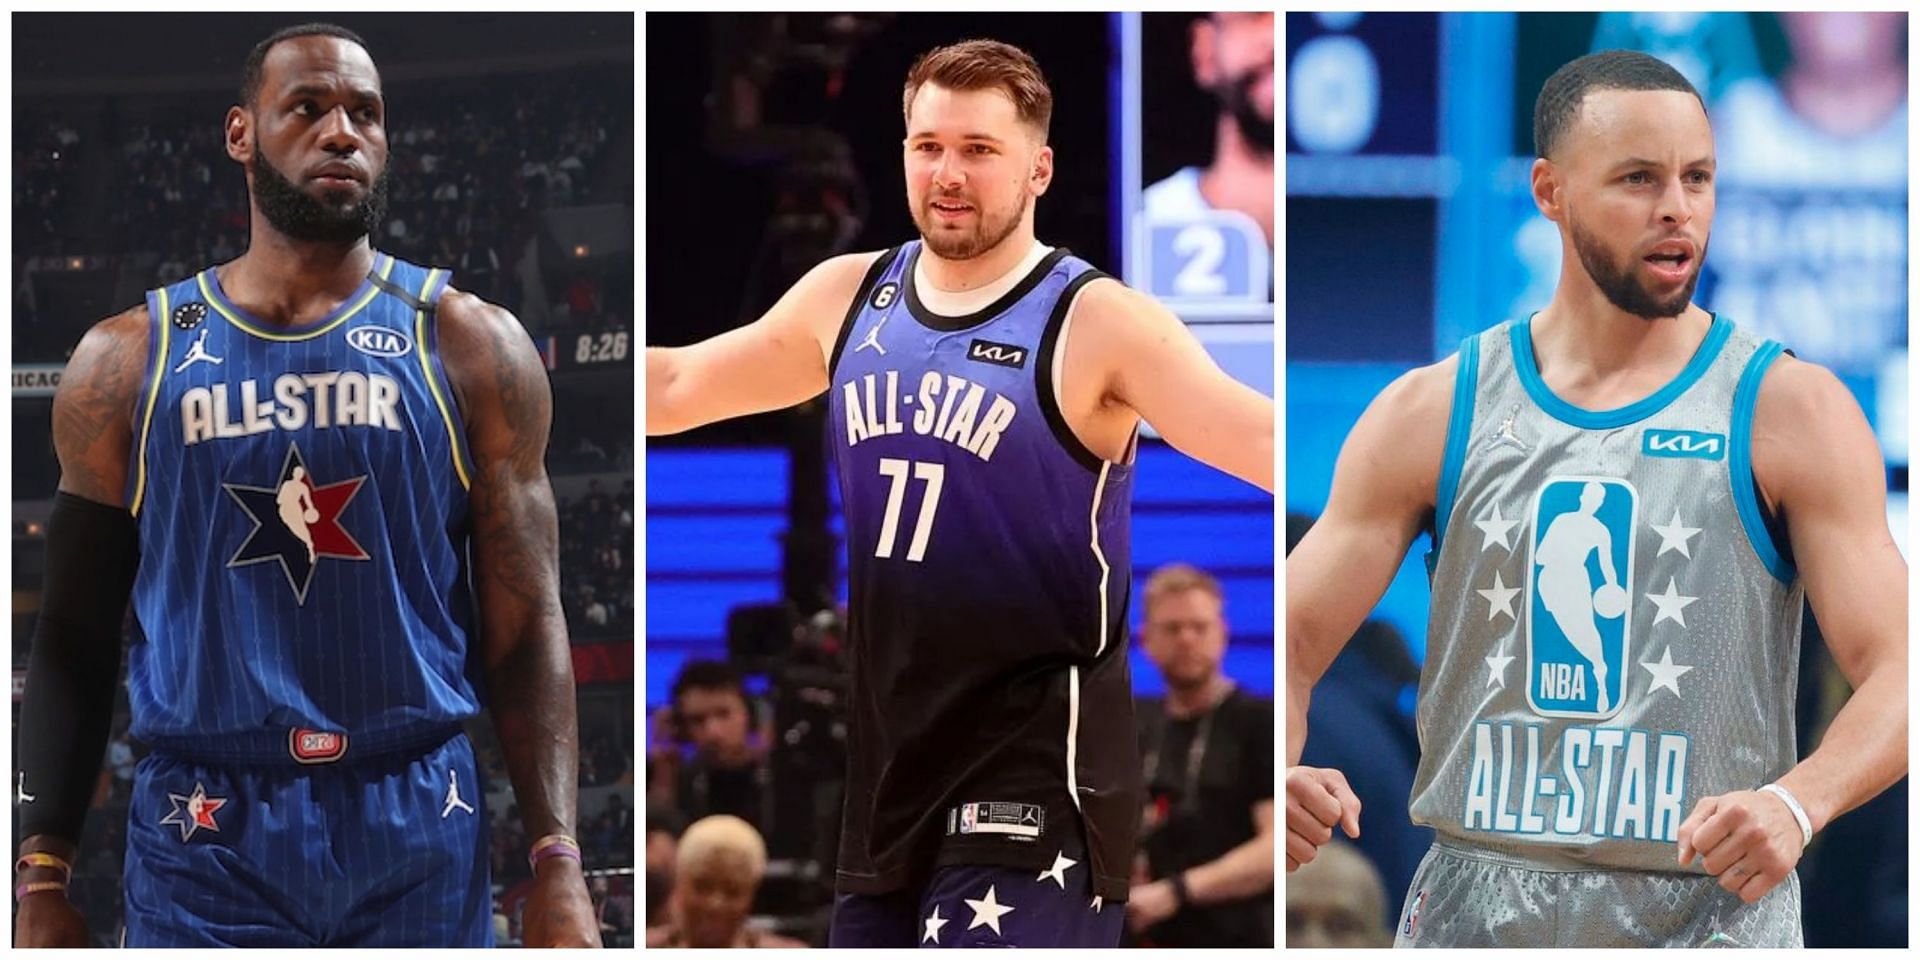 5 unexpected observations from the NBA All-Star voting